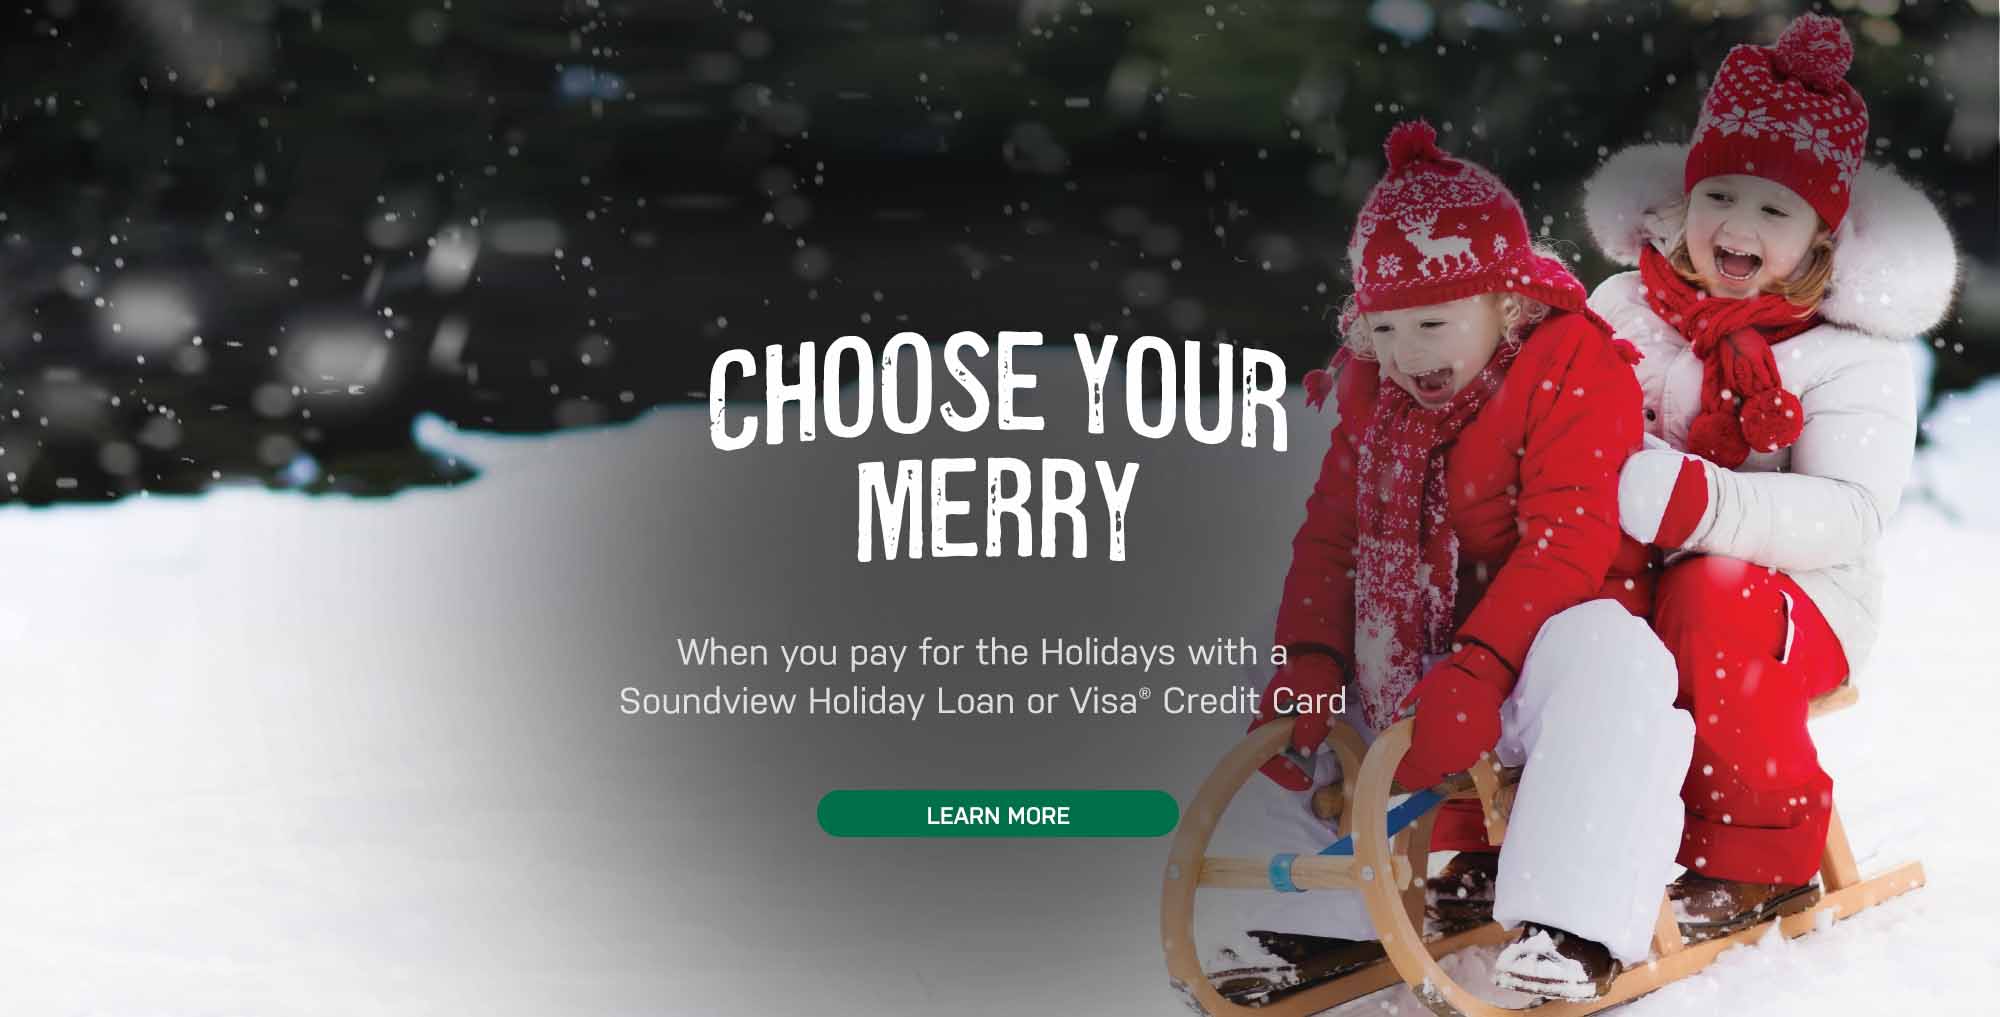 Choose your merry. When you pay for the holidays with a Soundview Holiday Loan or Visa Credit Card. Learn More.